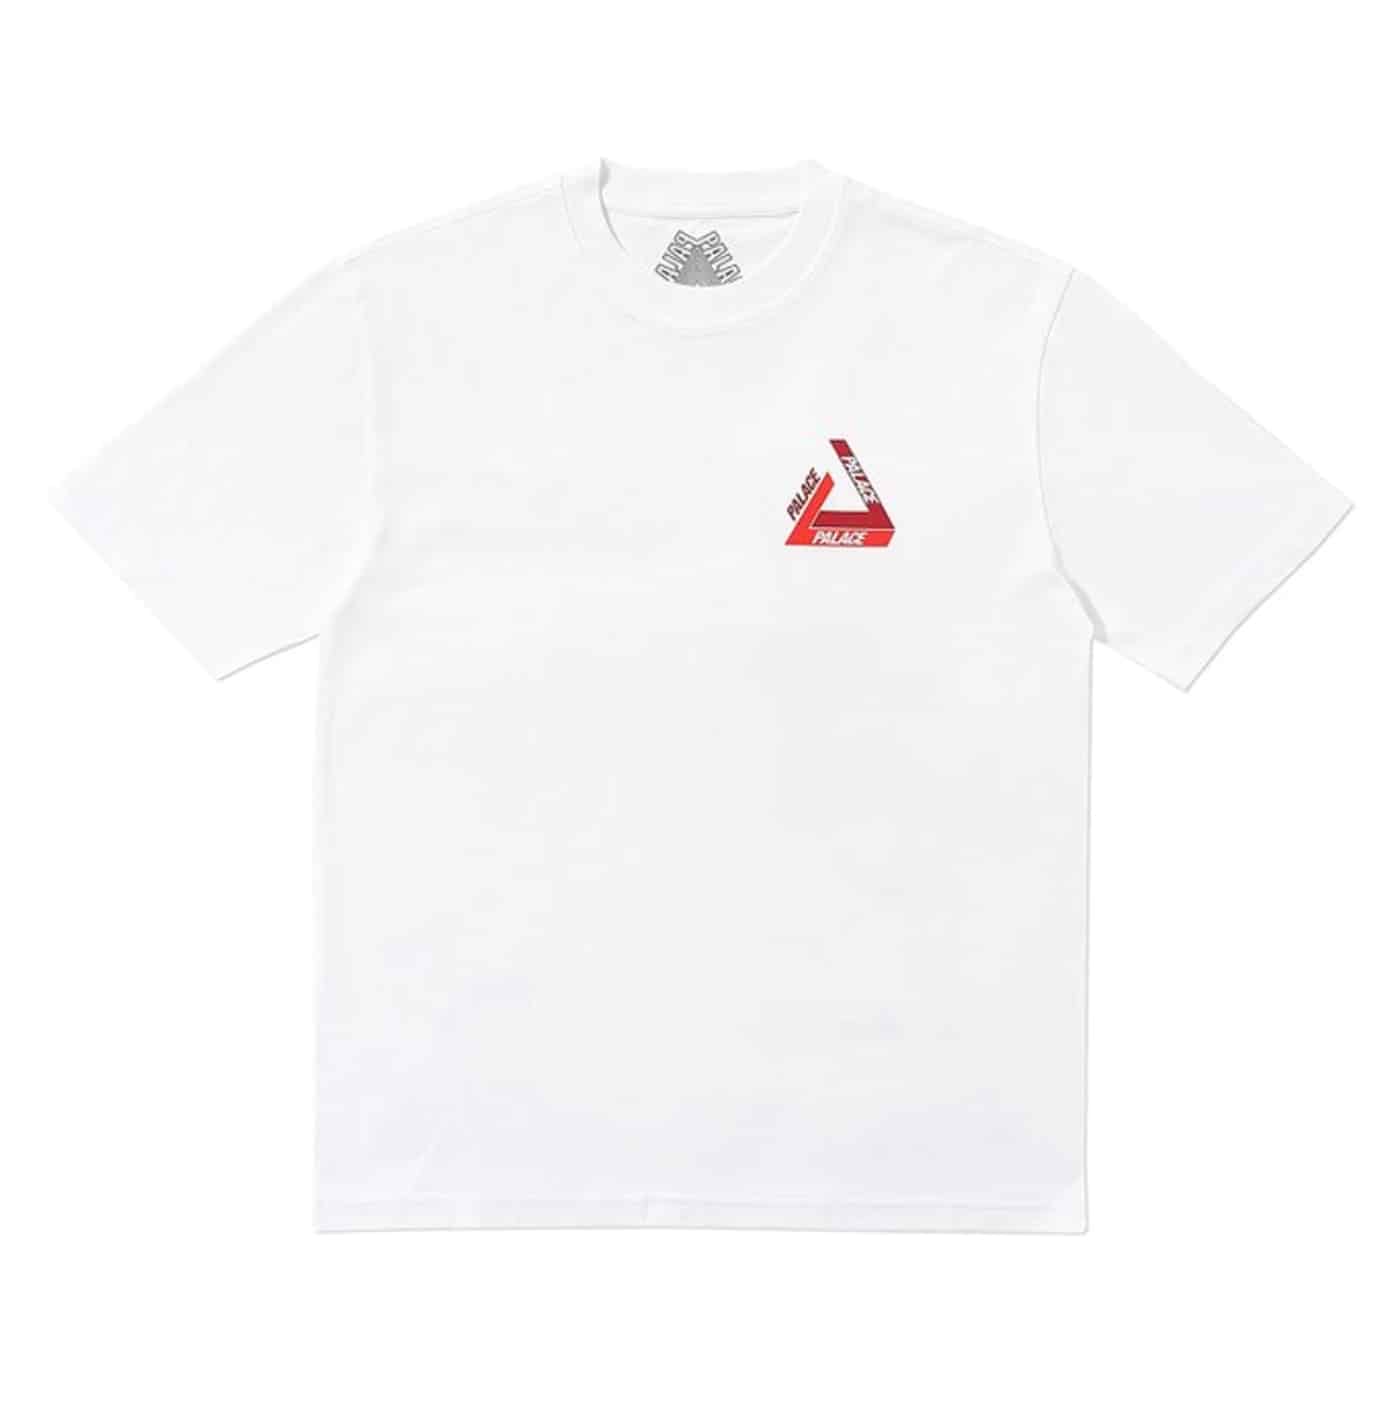 Palace Tri-Shadow T-Shirt White/Red Palace